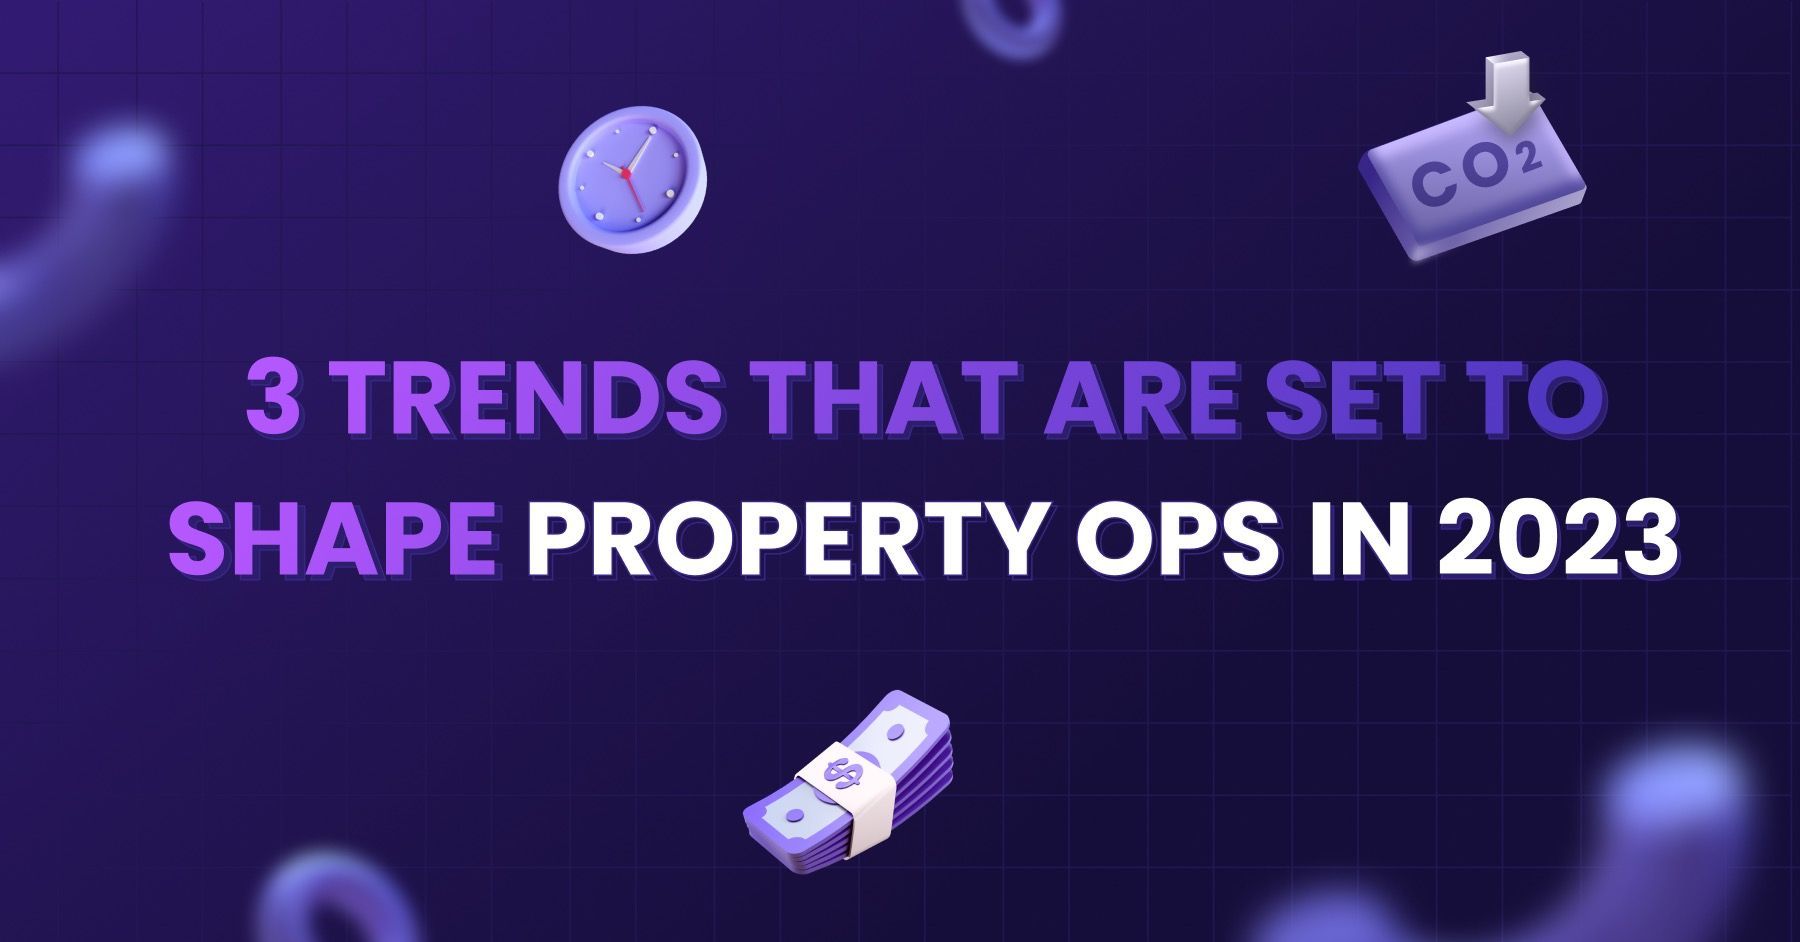 Facilio property ops trends report 2023